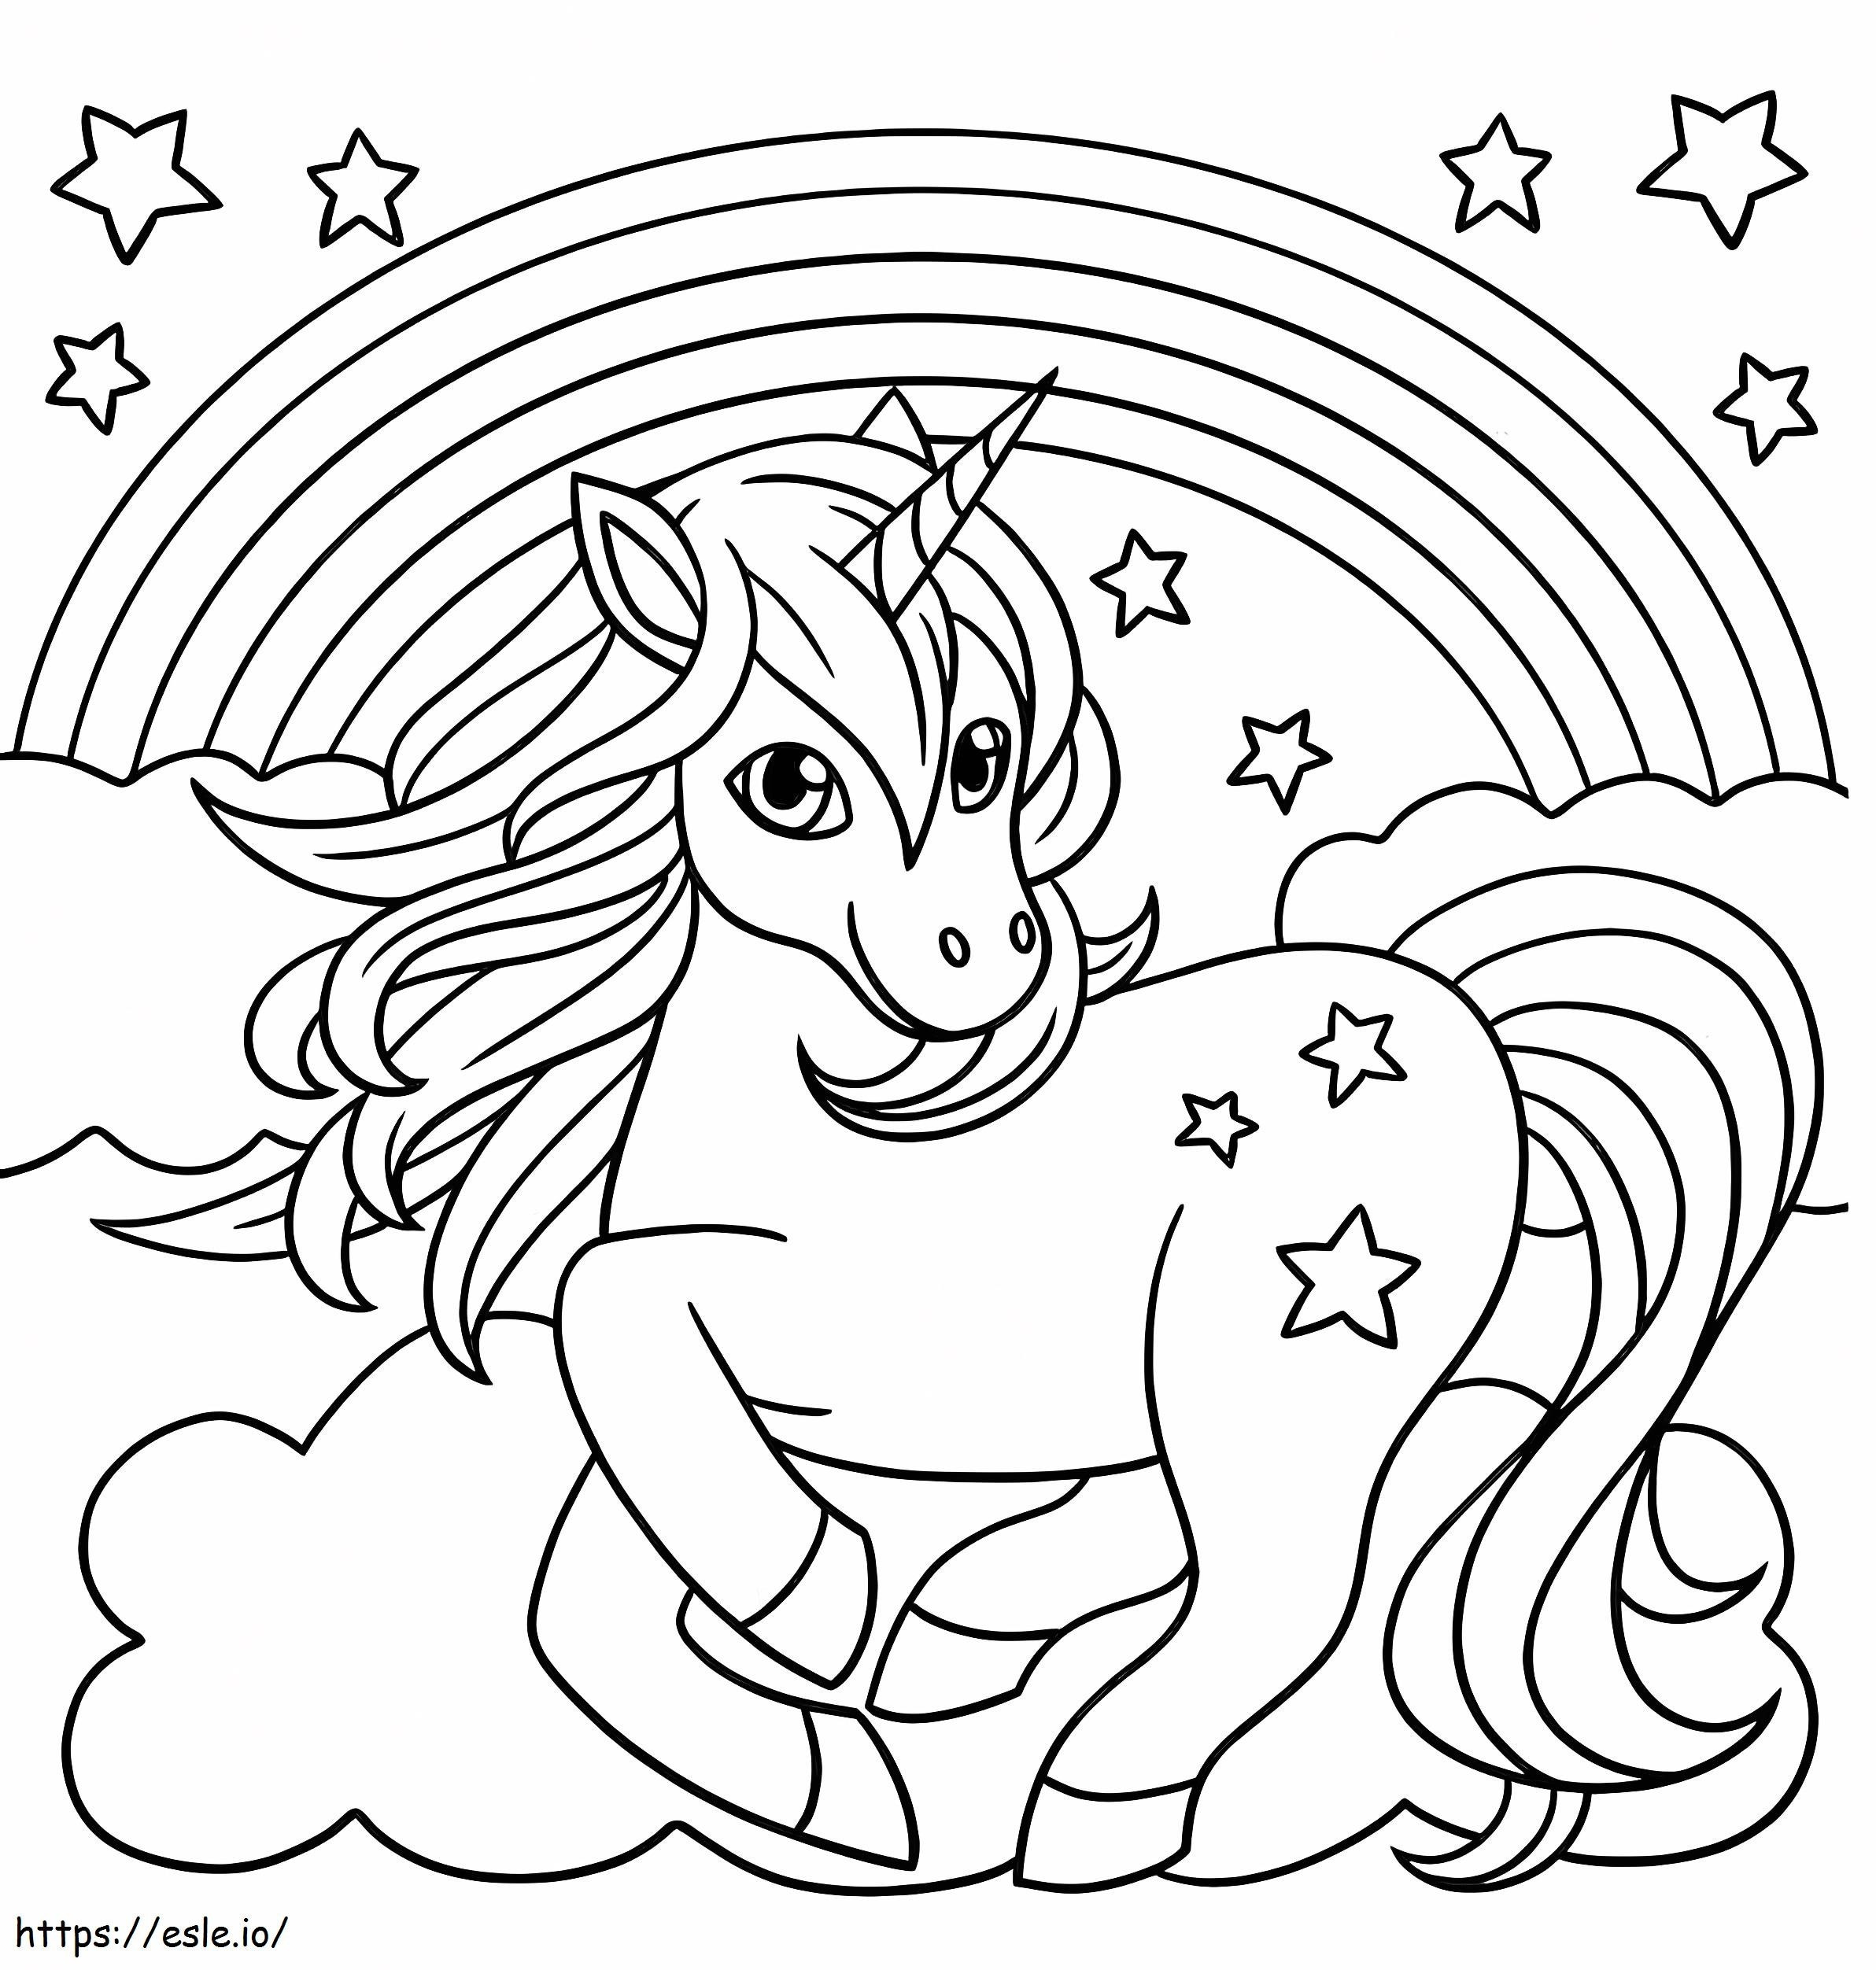 Smiling Unicorn With Rainbow And Stars coloring page